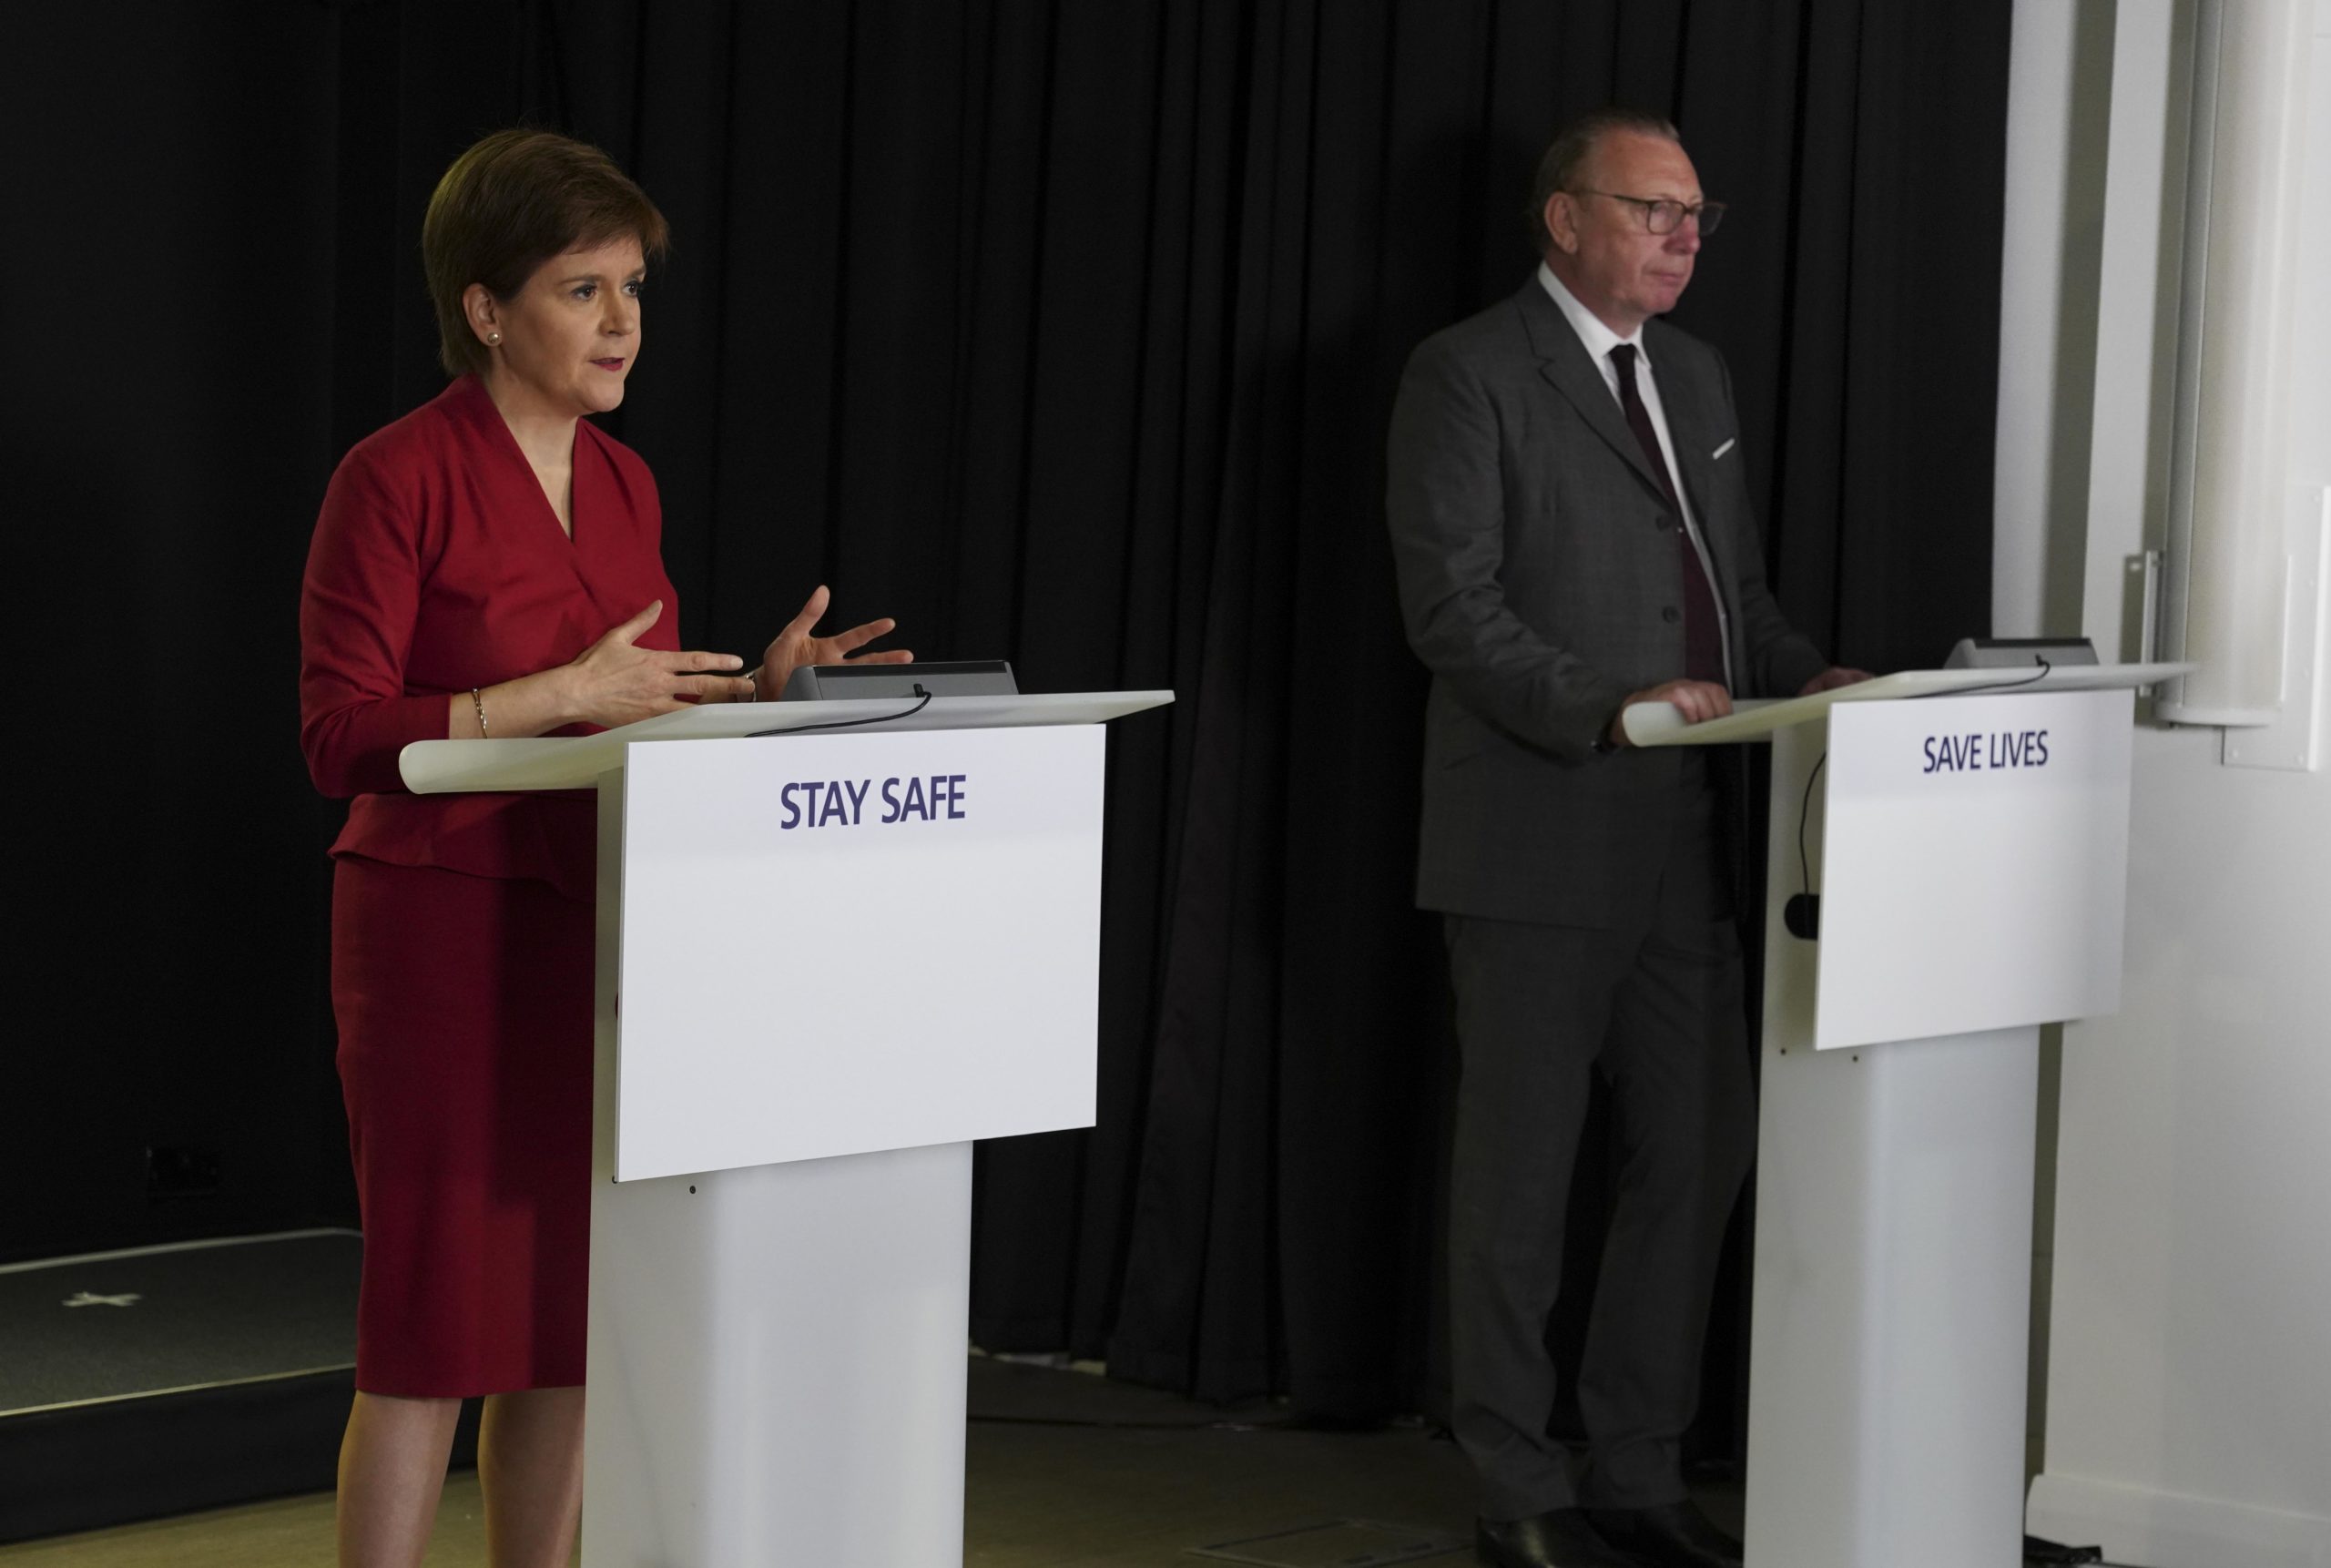 First Minister Nicola Sturgeon and Benny Higgins, former CEO of Tesco Bank.